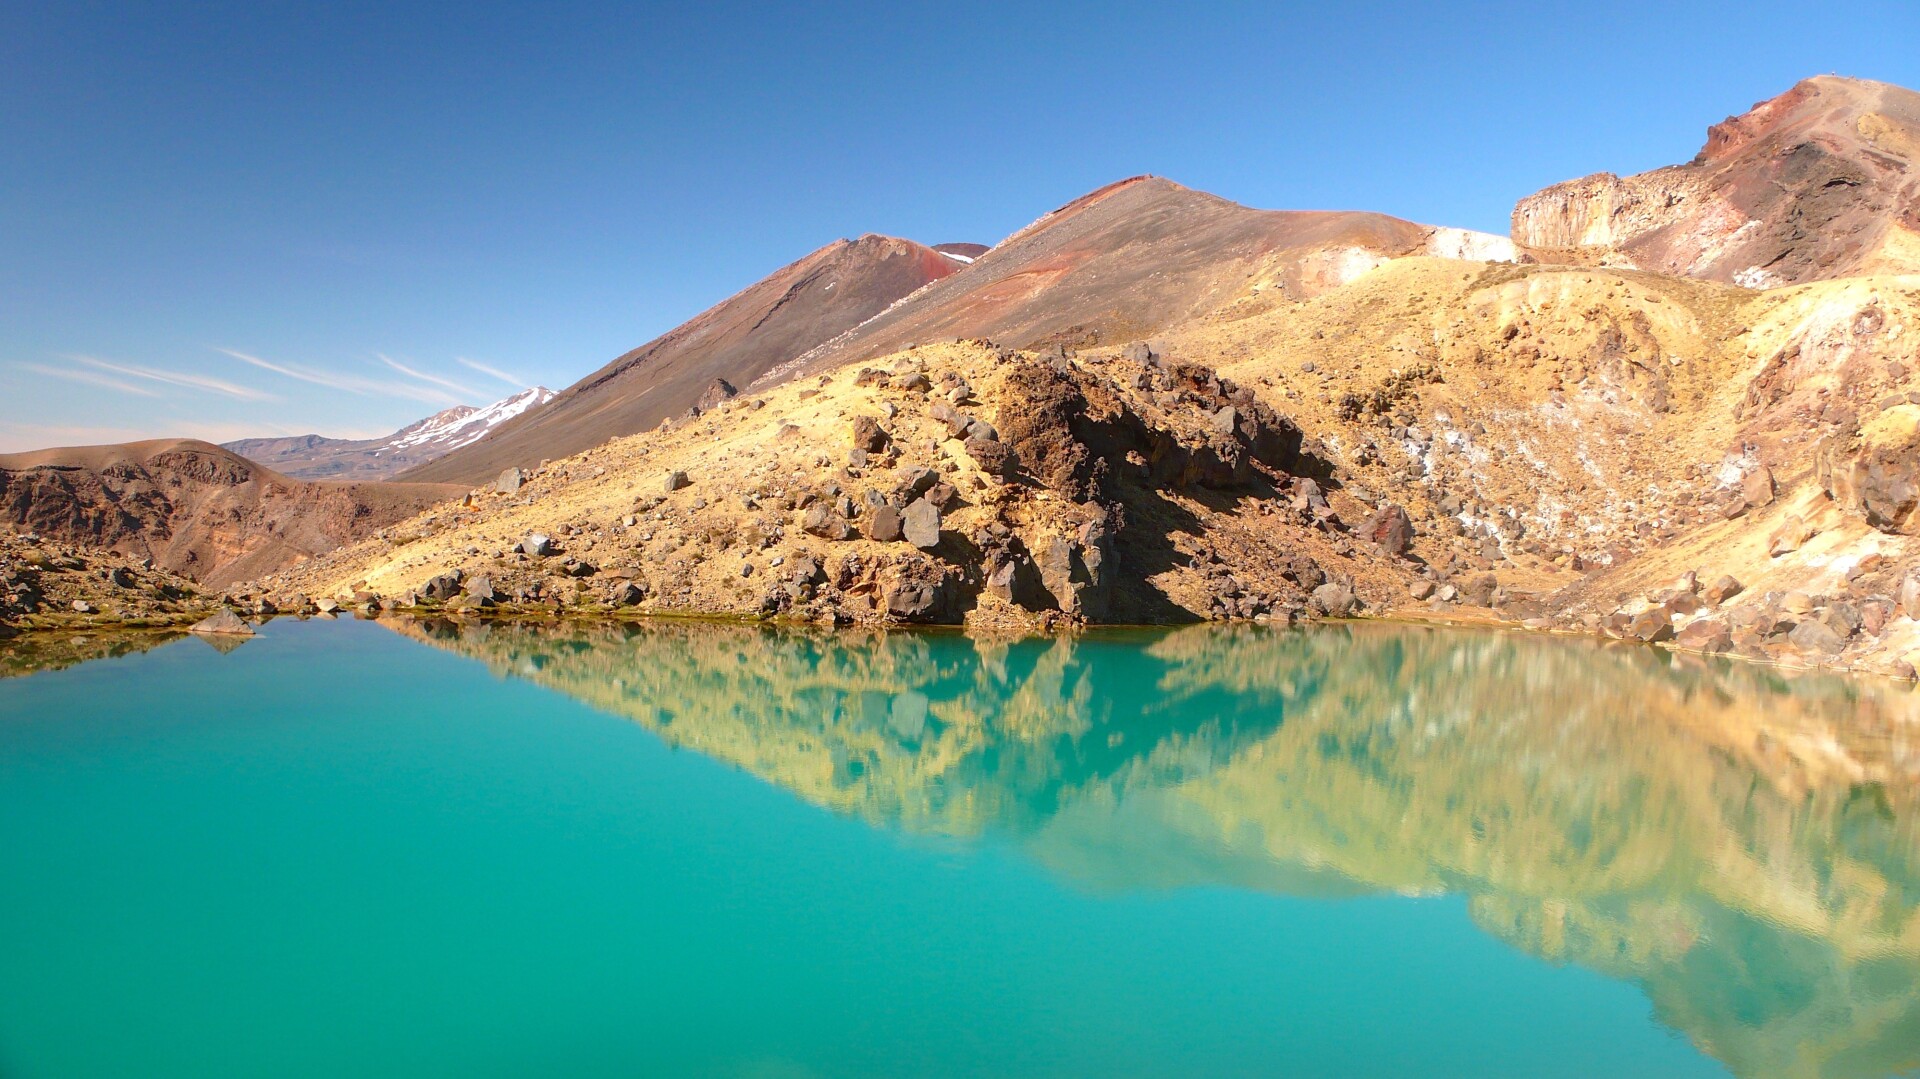 Tongariro's Emerald Lakes (Ngarotopounamu), mid walk, colors are from minerals and milkiness from suspended clay particles